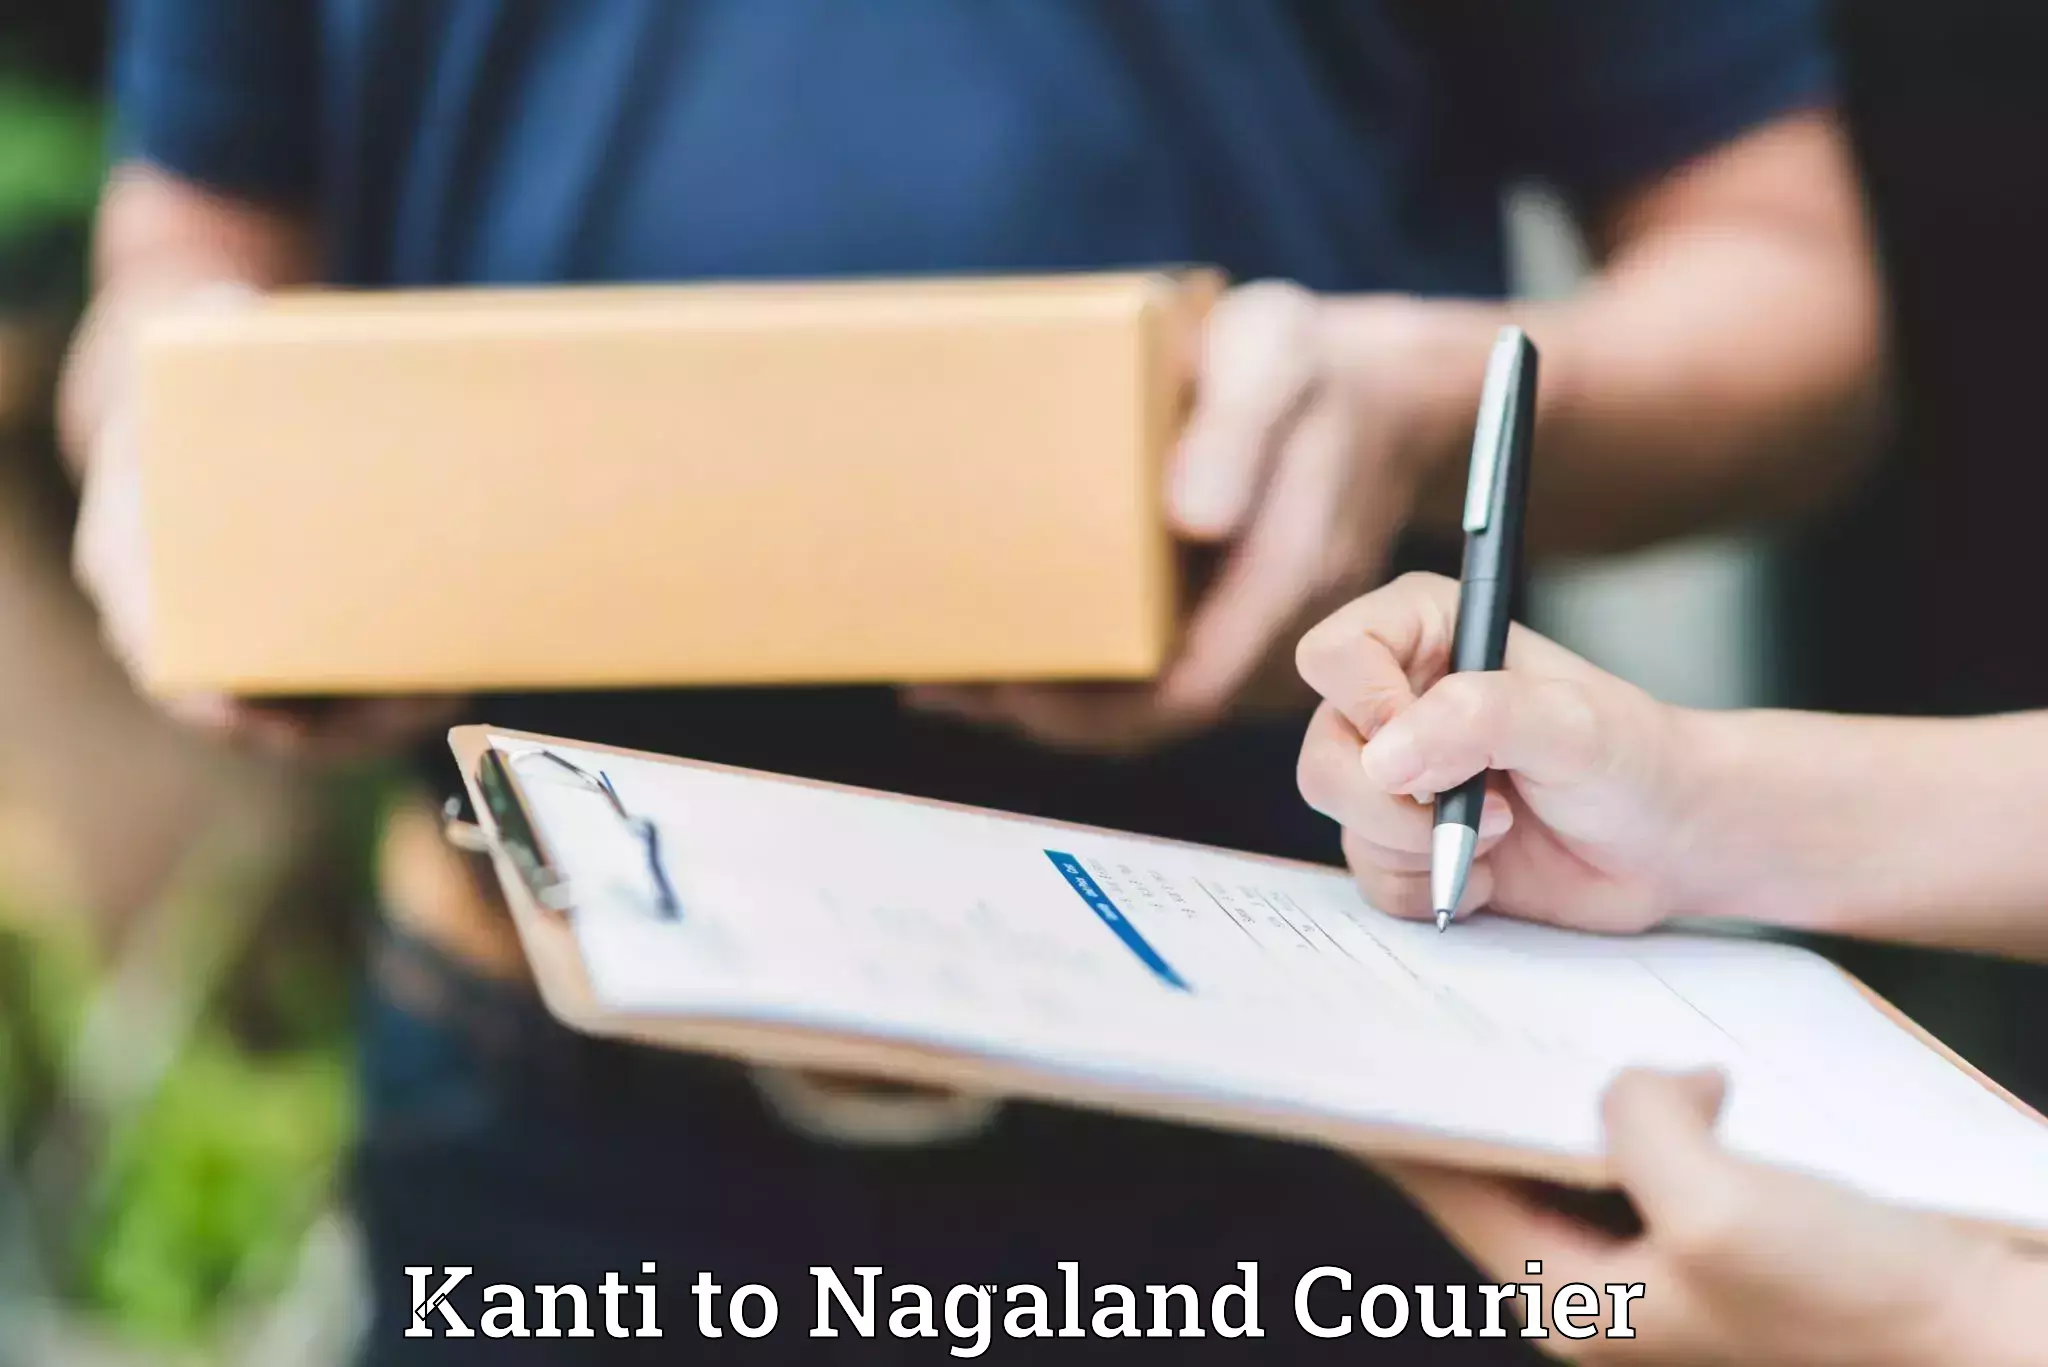 Luggage delivery network Kanti to Nagaland